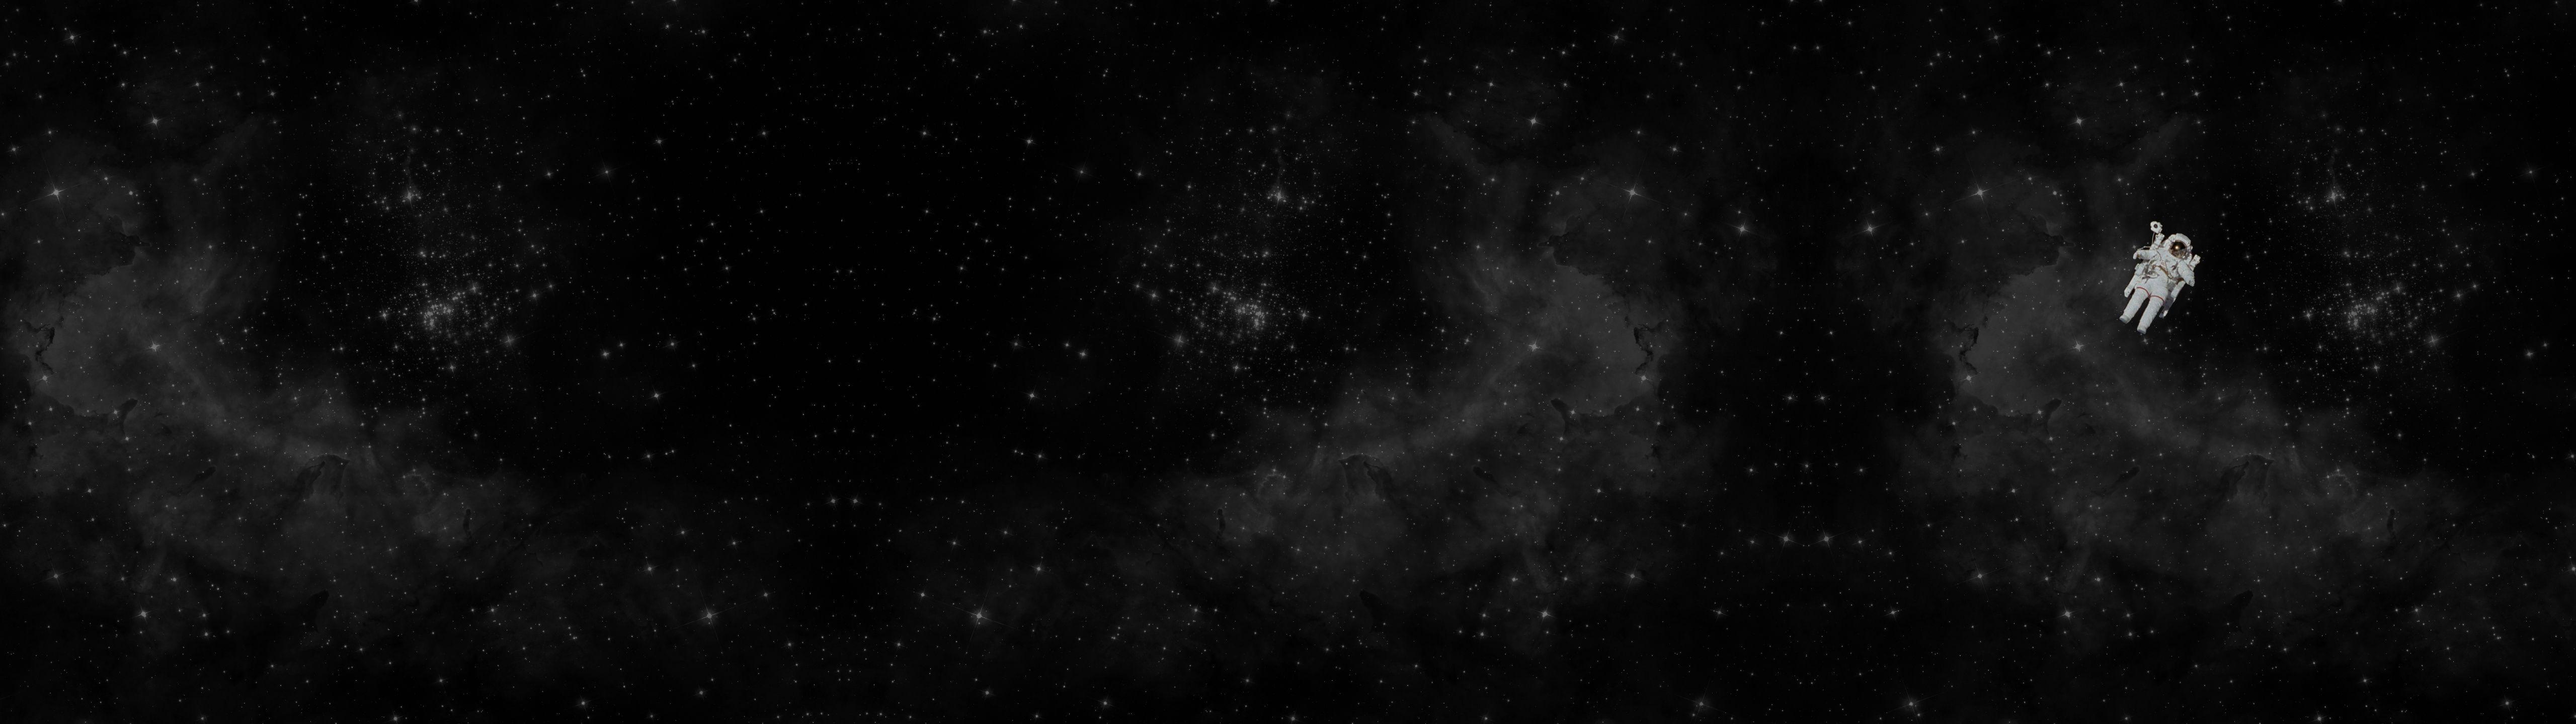 5120x1440 Space Wallpapers - Top Free 5120x1440 Space ...